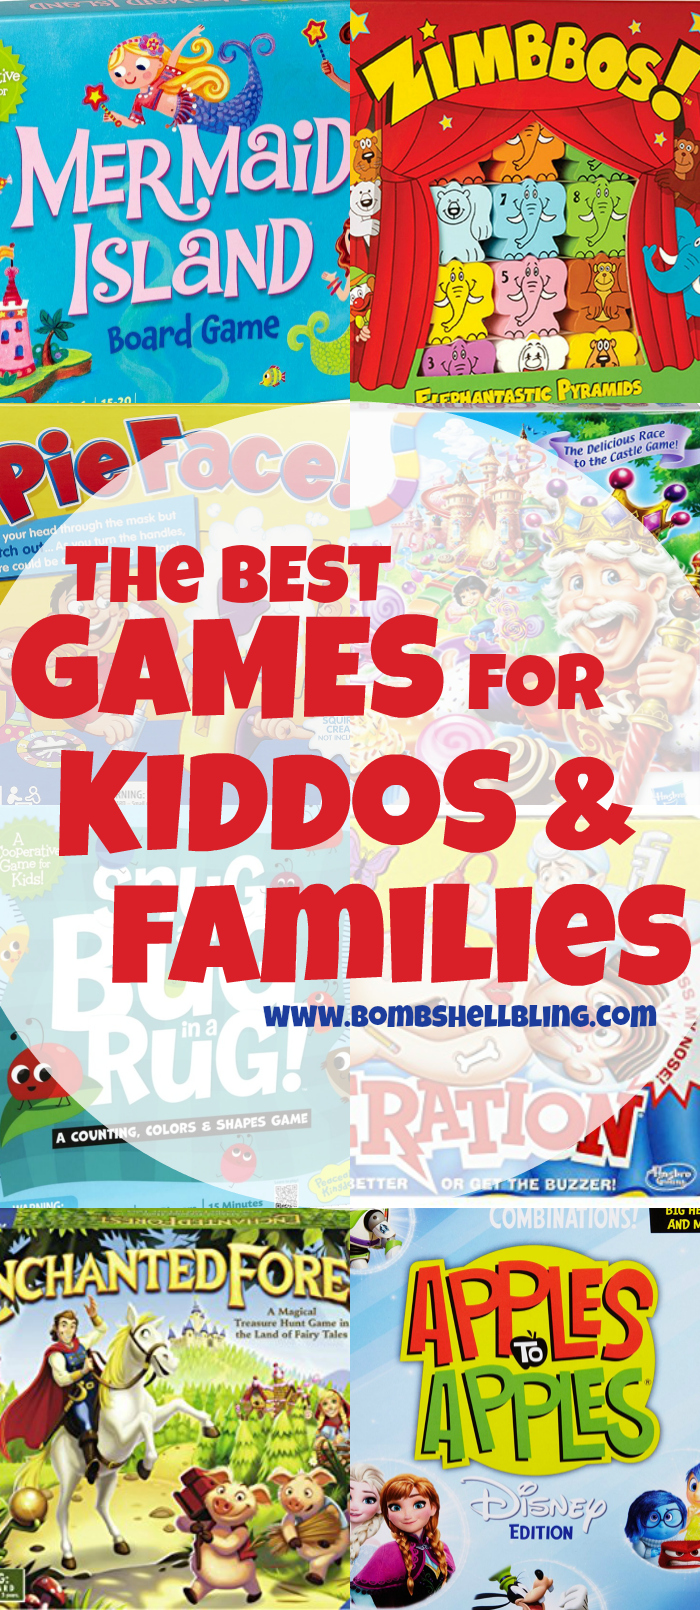 These are the 20 best board games for kids and families. Grab some today to encourage learning and social skill development. But, most of all, FUN!